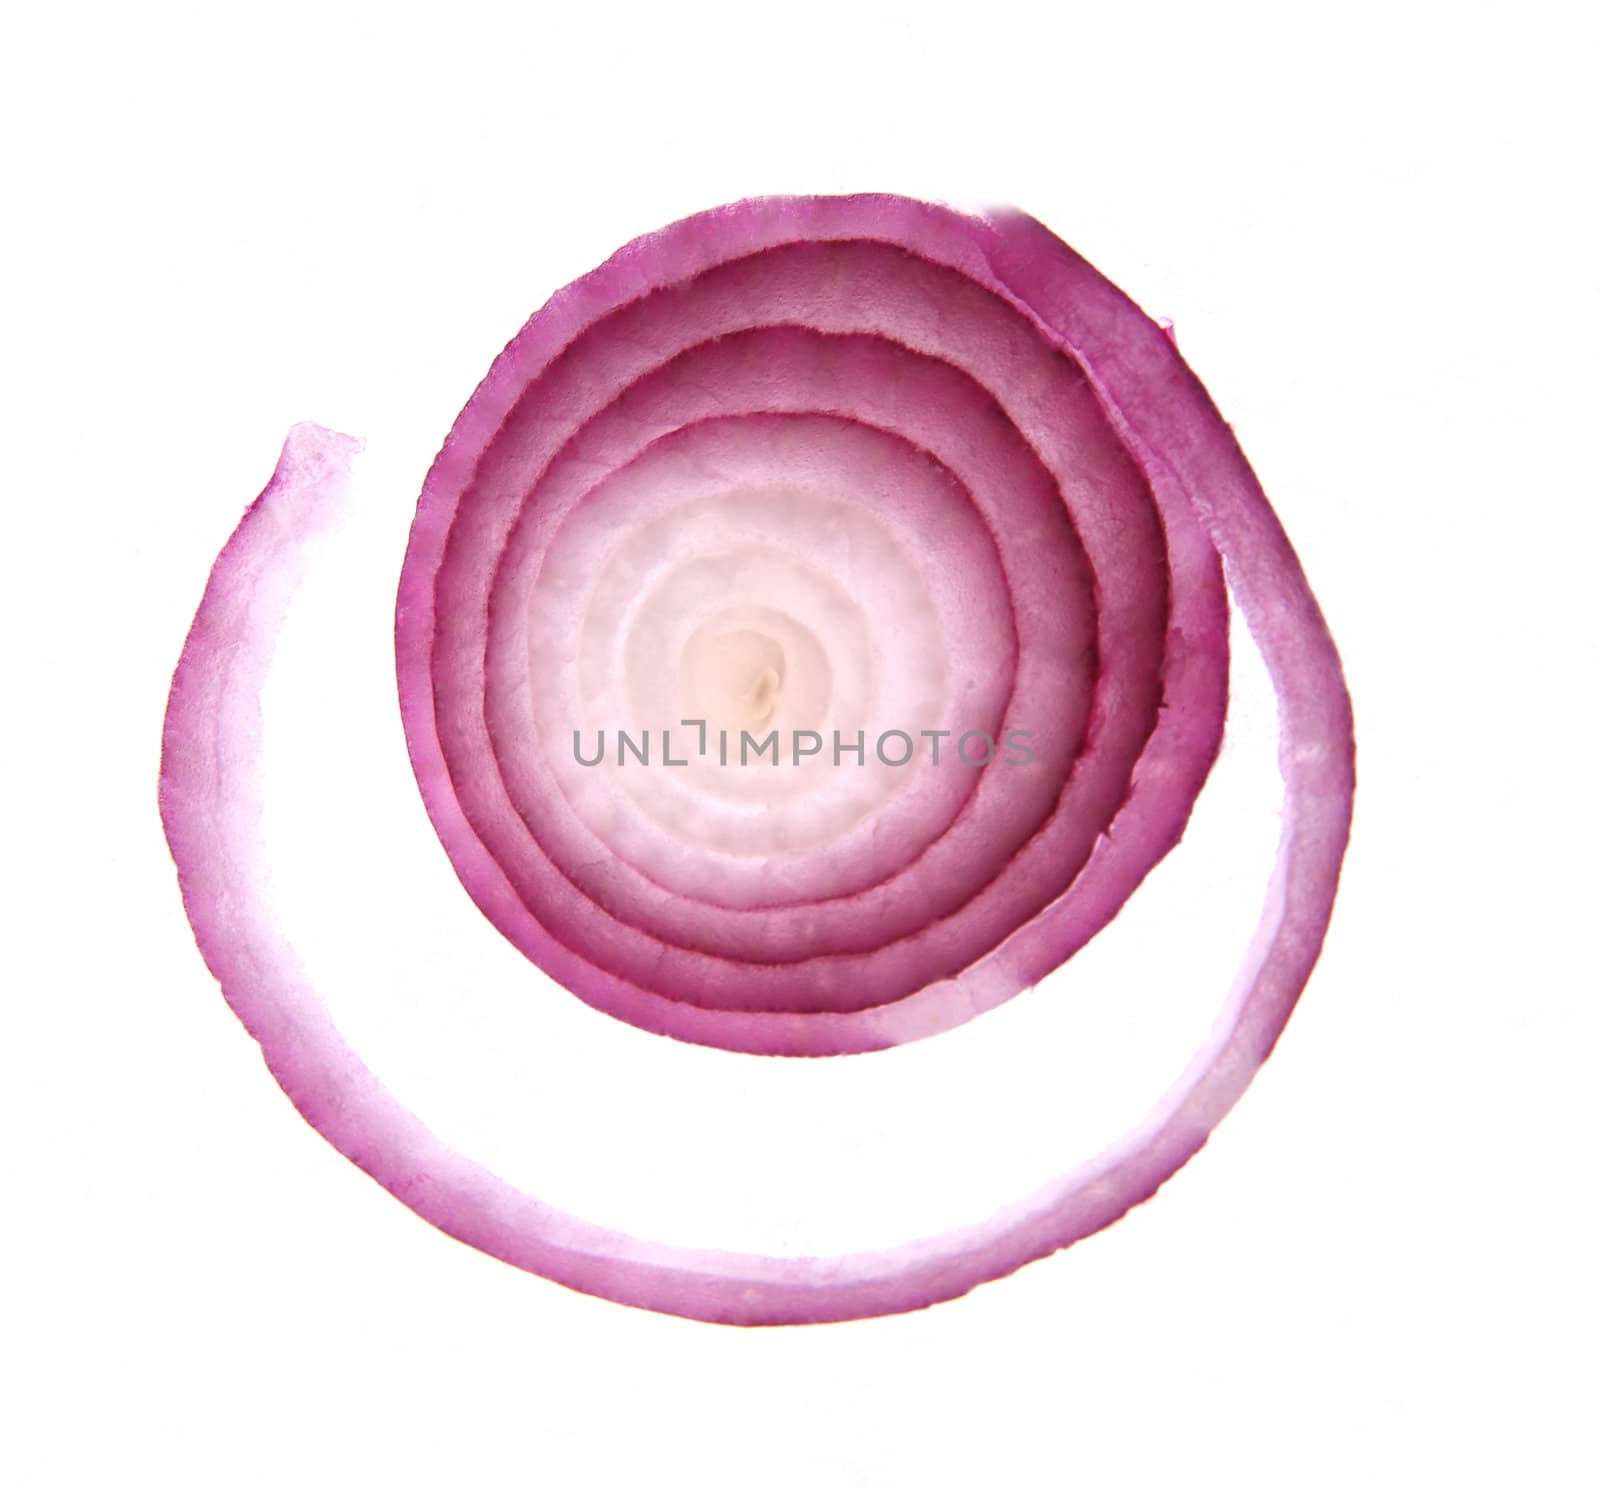 Slices of red onion by palomnik